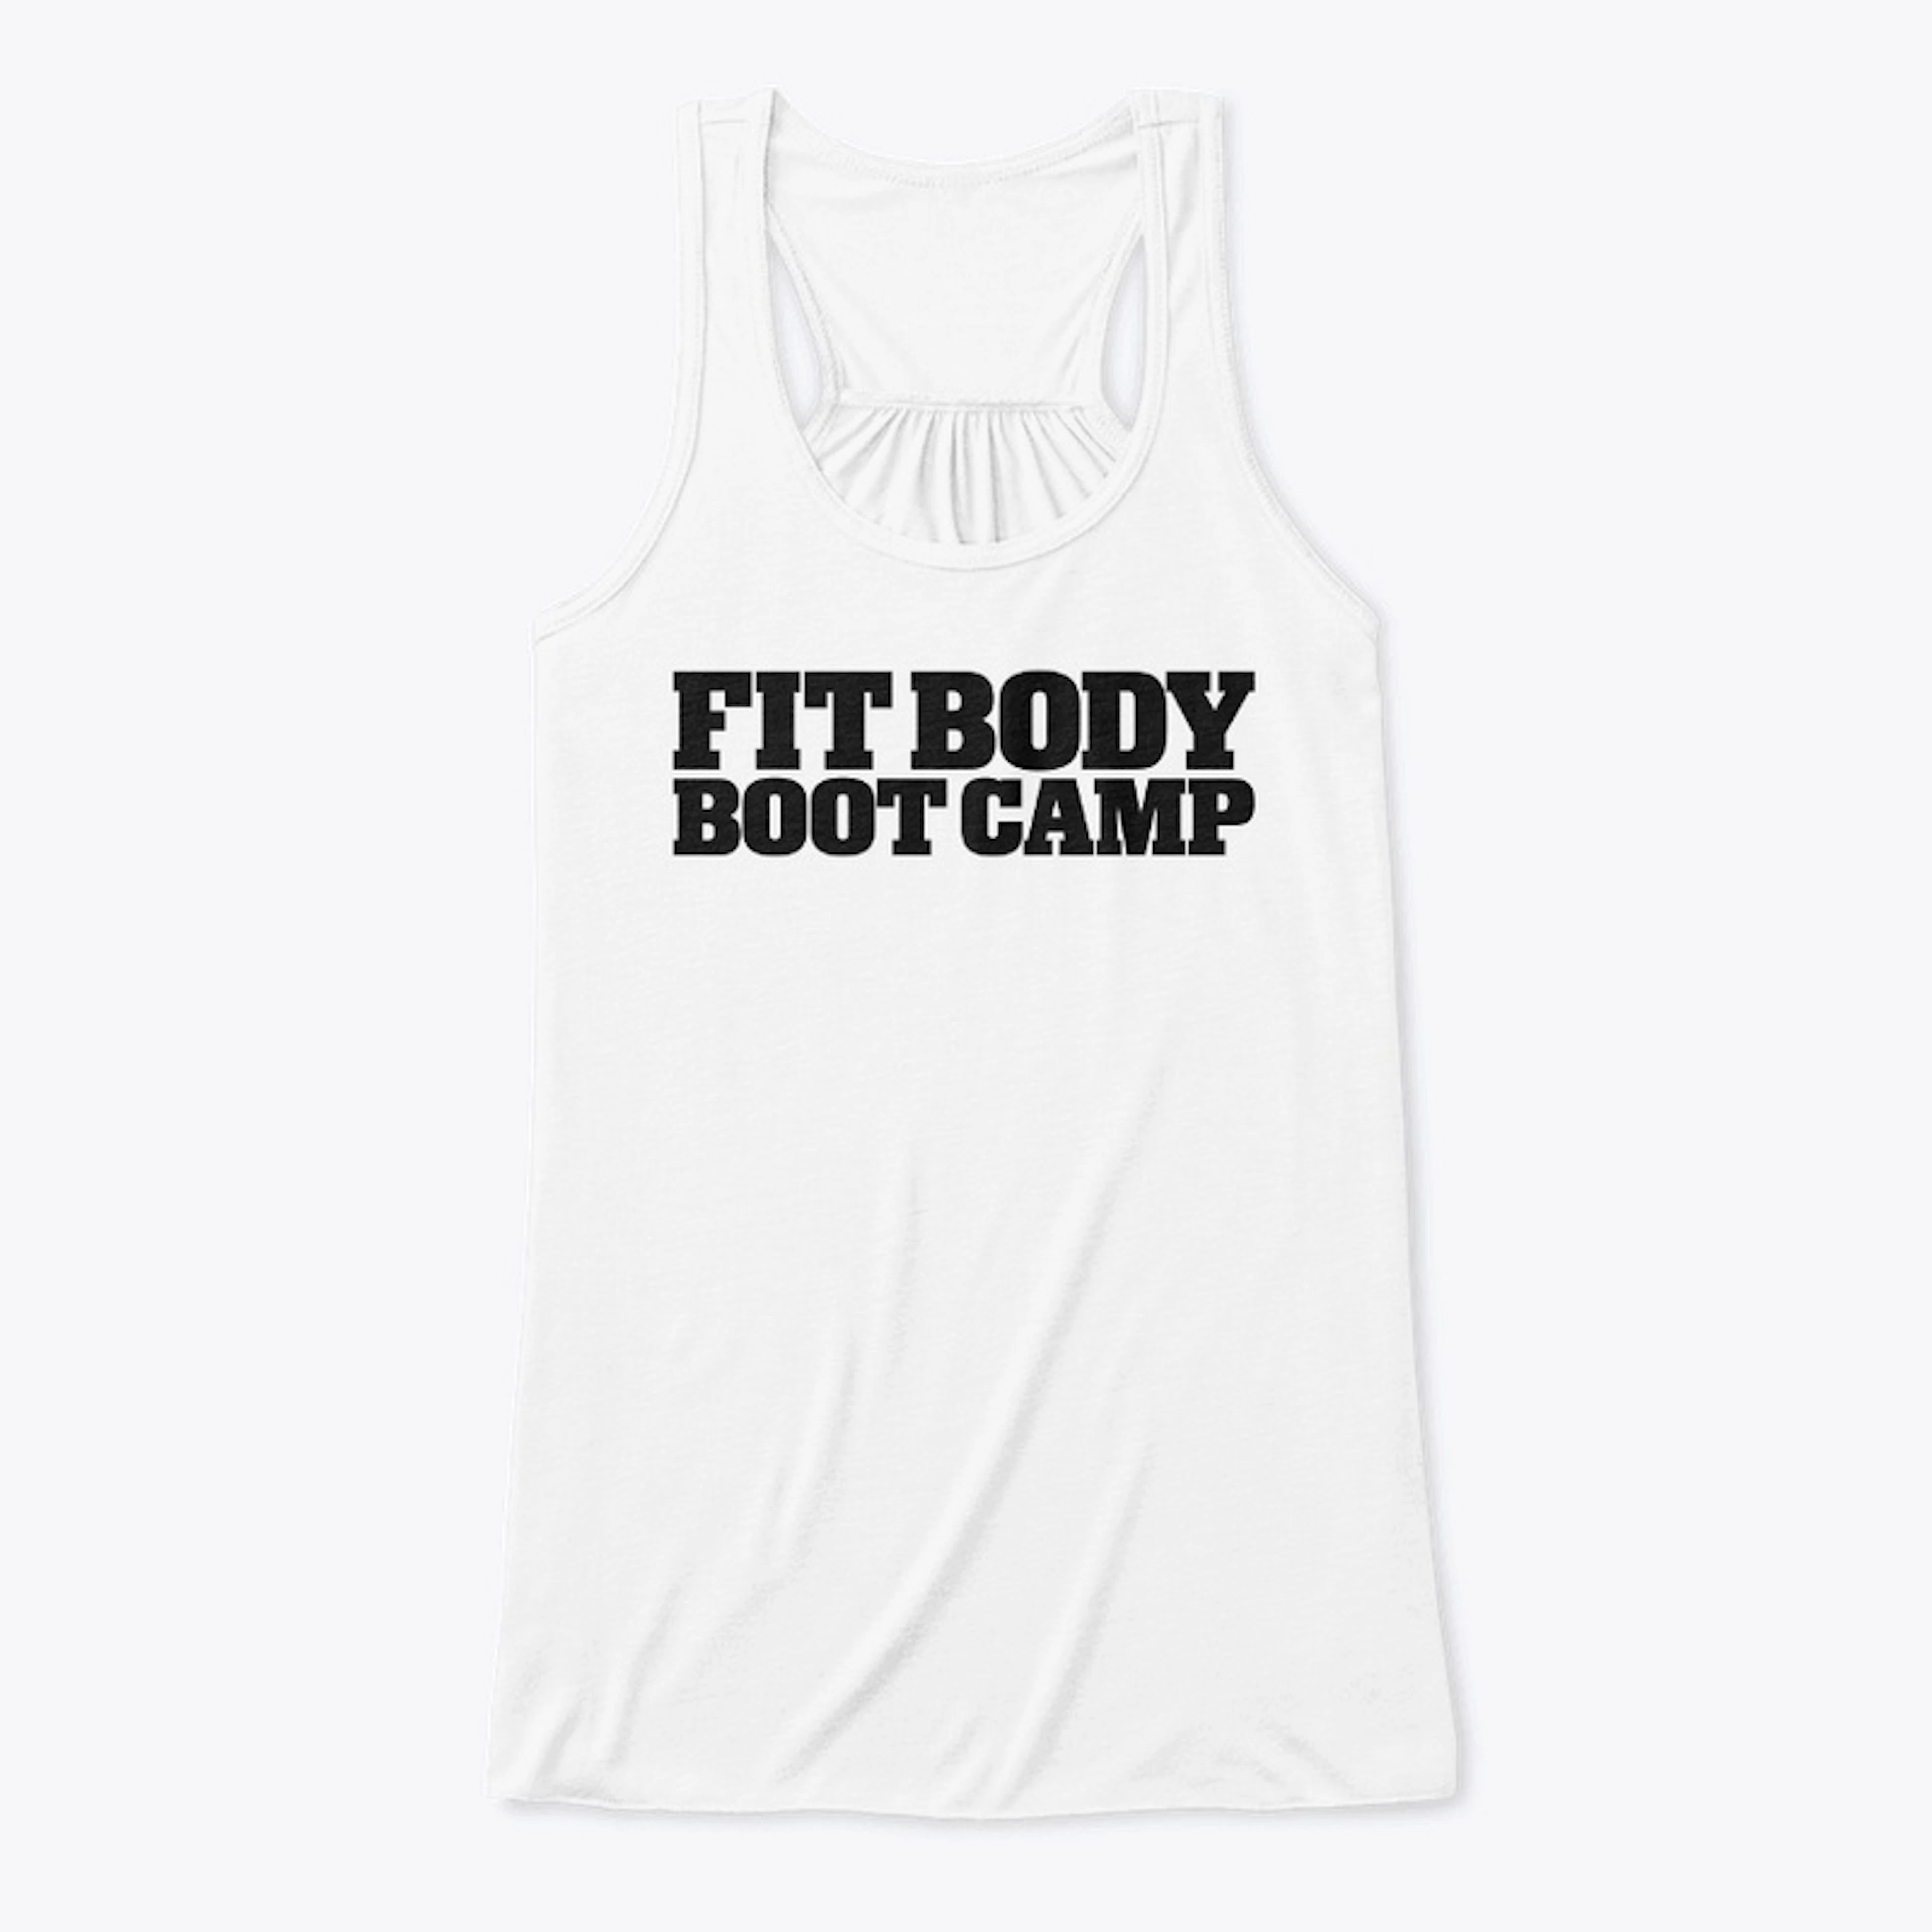 Fit Body Boot Camp - Black Out